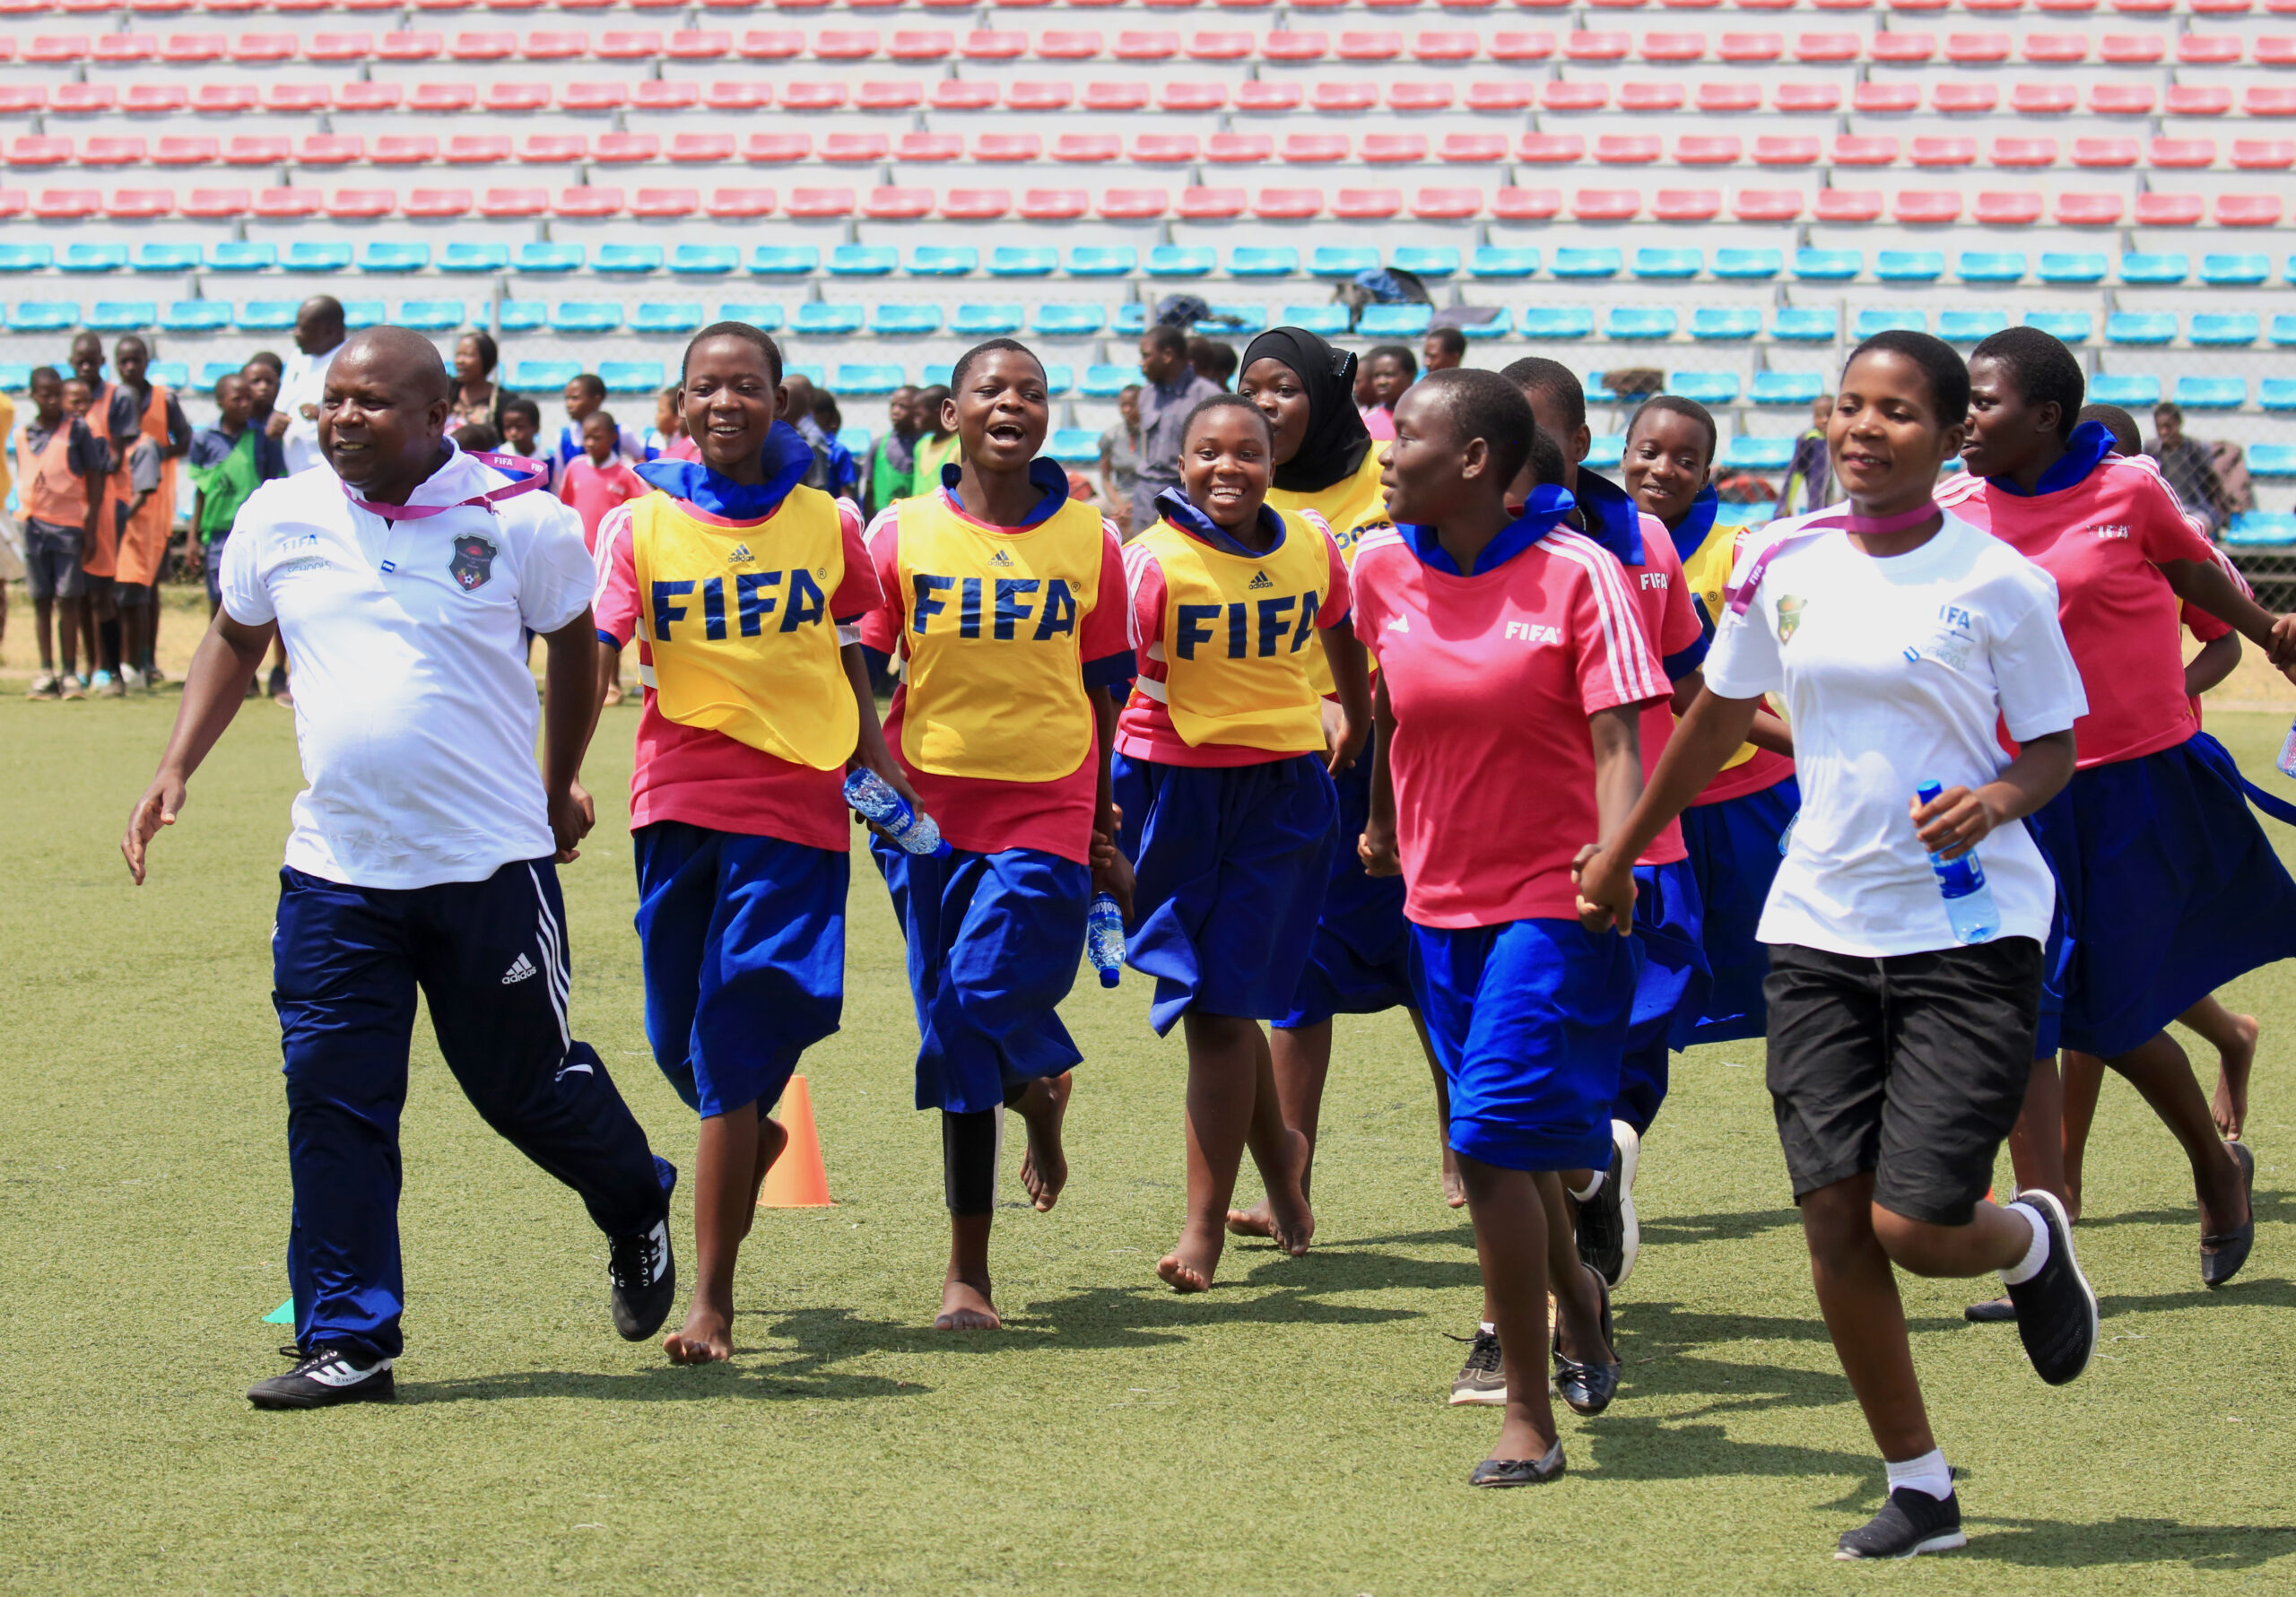 FAM’s Women’s Football Campaign to be launched this weekend